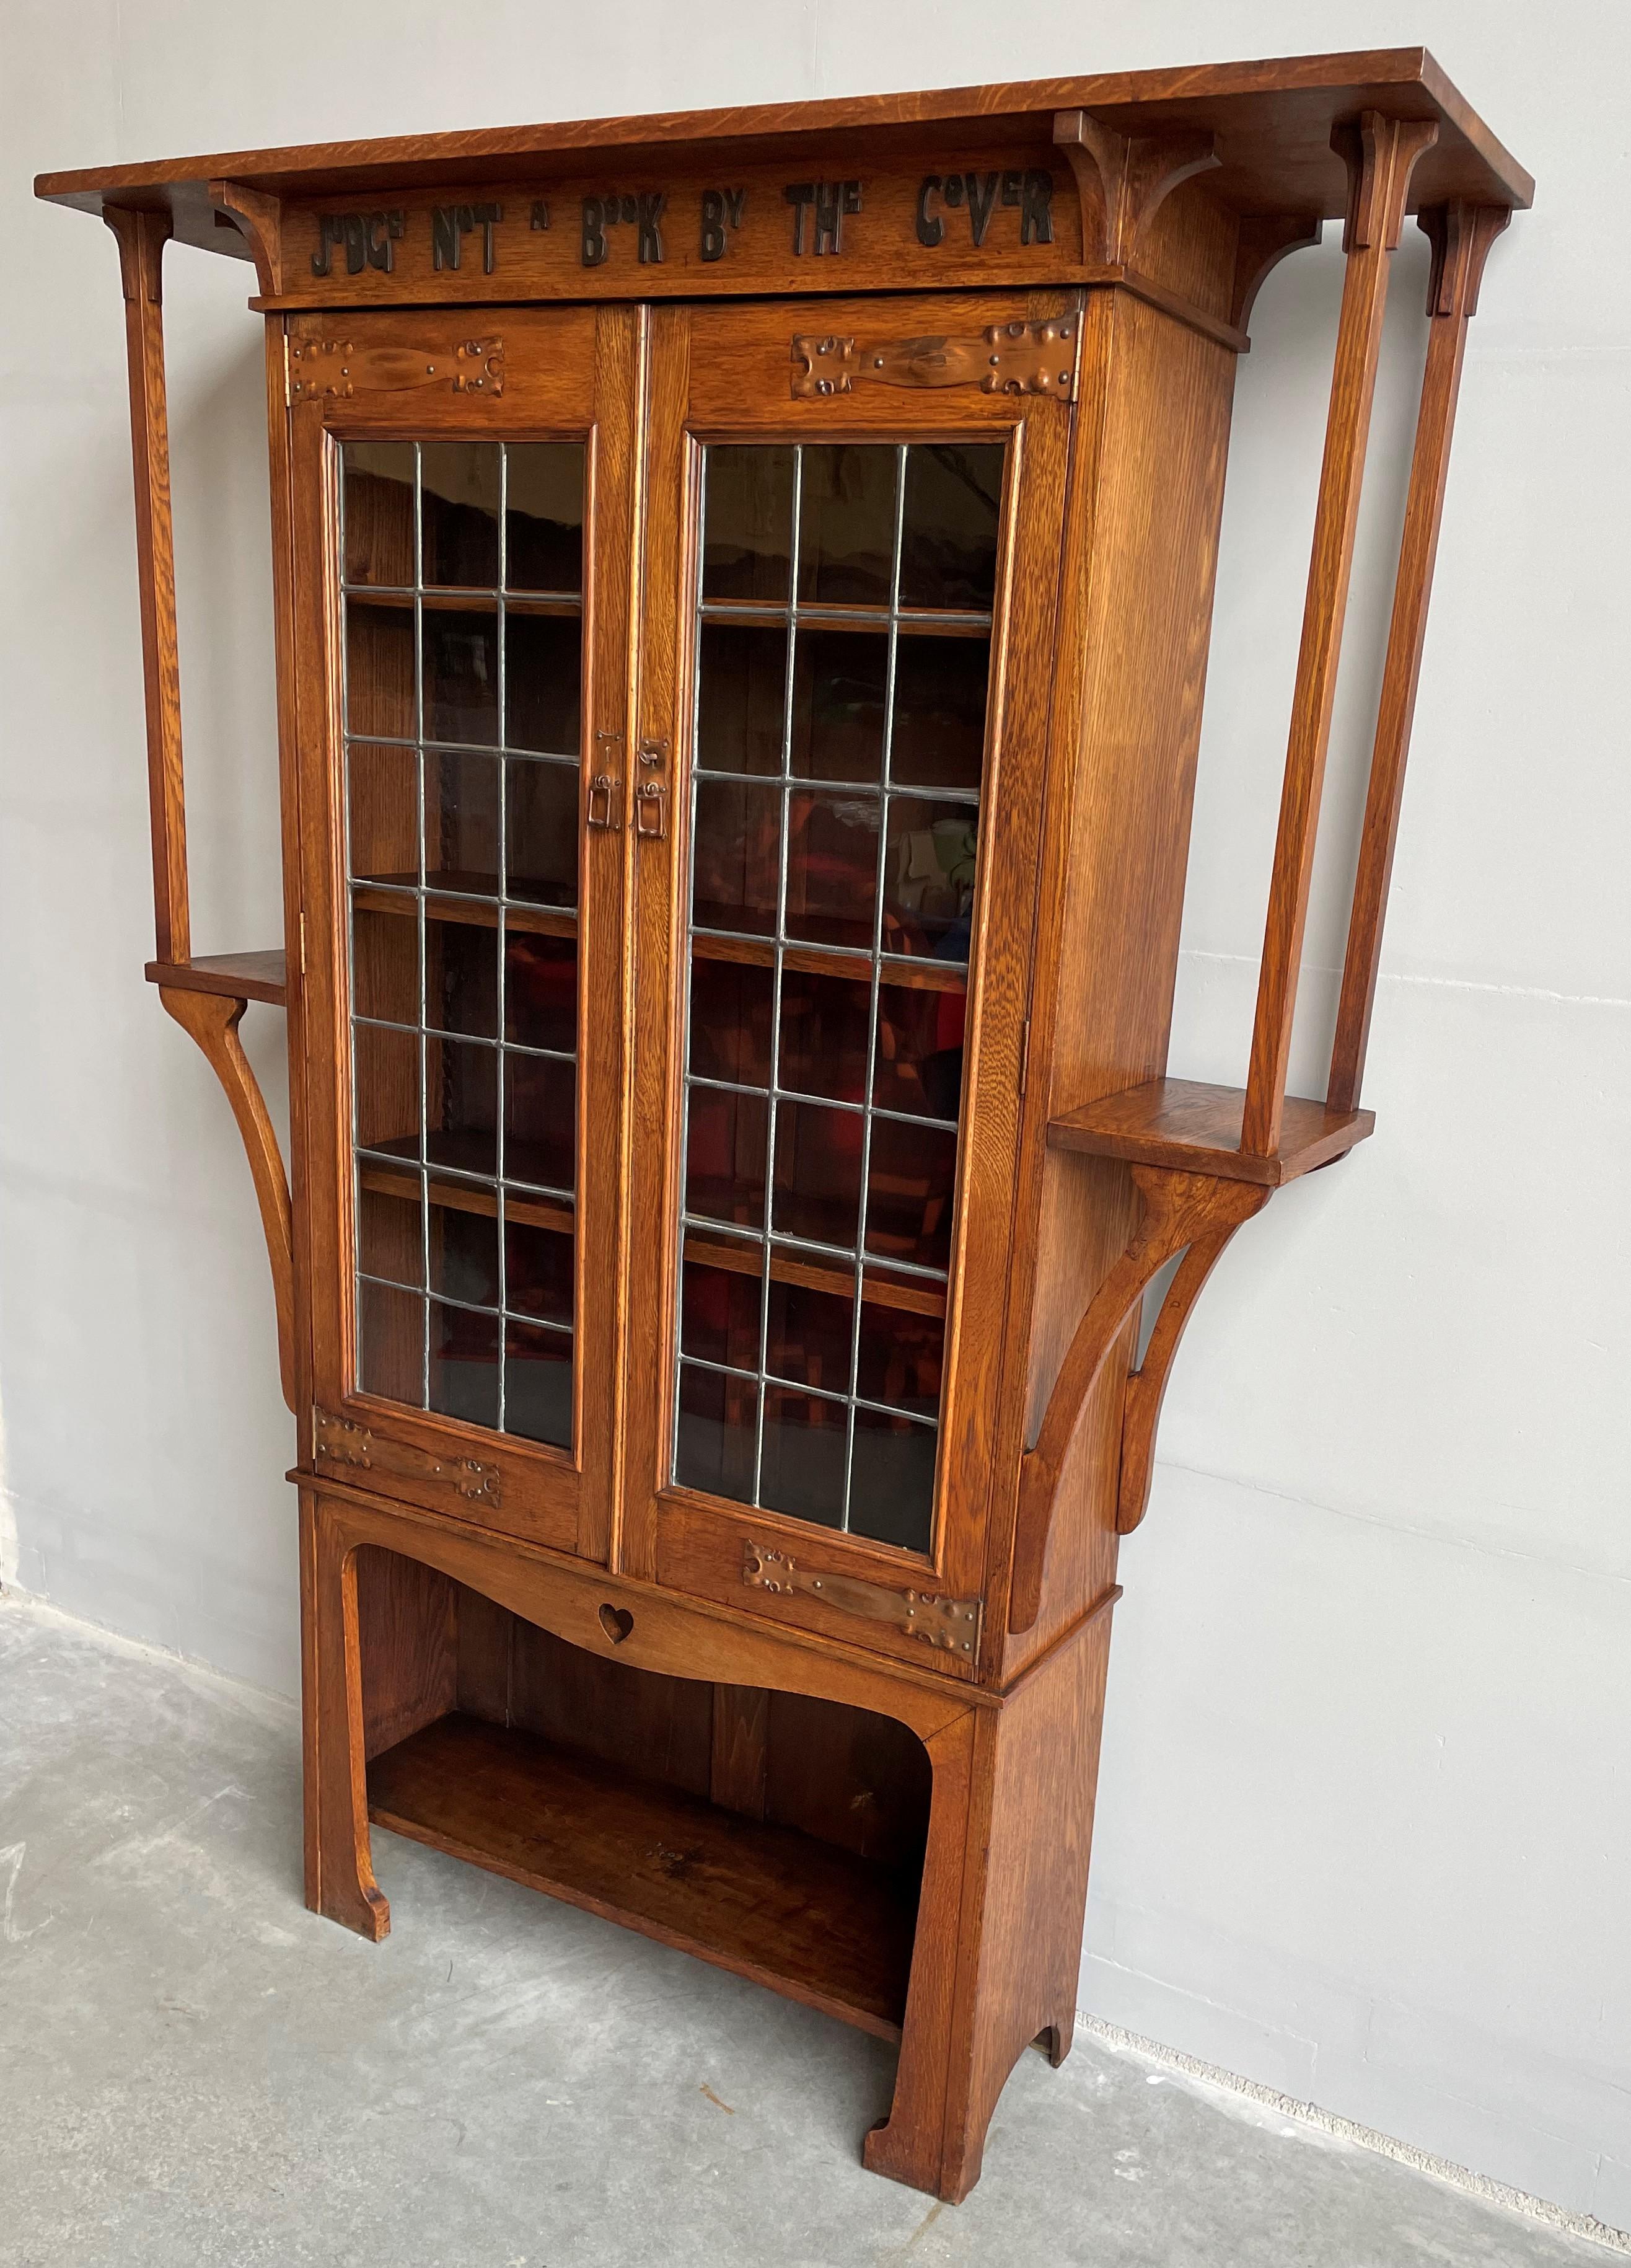 Pure Arts and Crafts bookcase reminding us to 'Judge Not A Book By The Cover'.

This early and good size Arts & Crafts bookcase with its stunning design makes a great statement piece for your private library or living room. In our view this is not